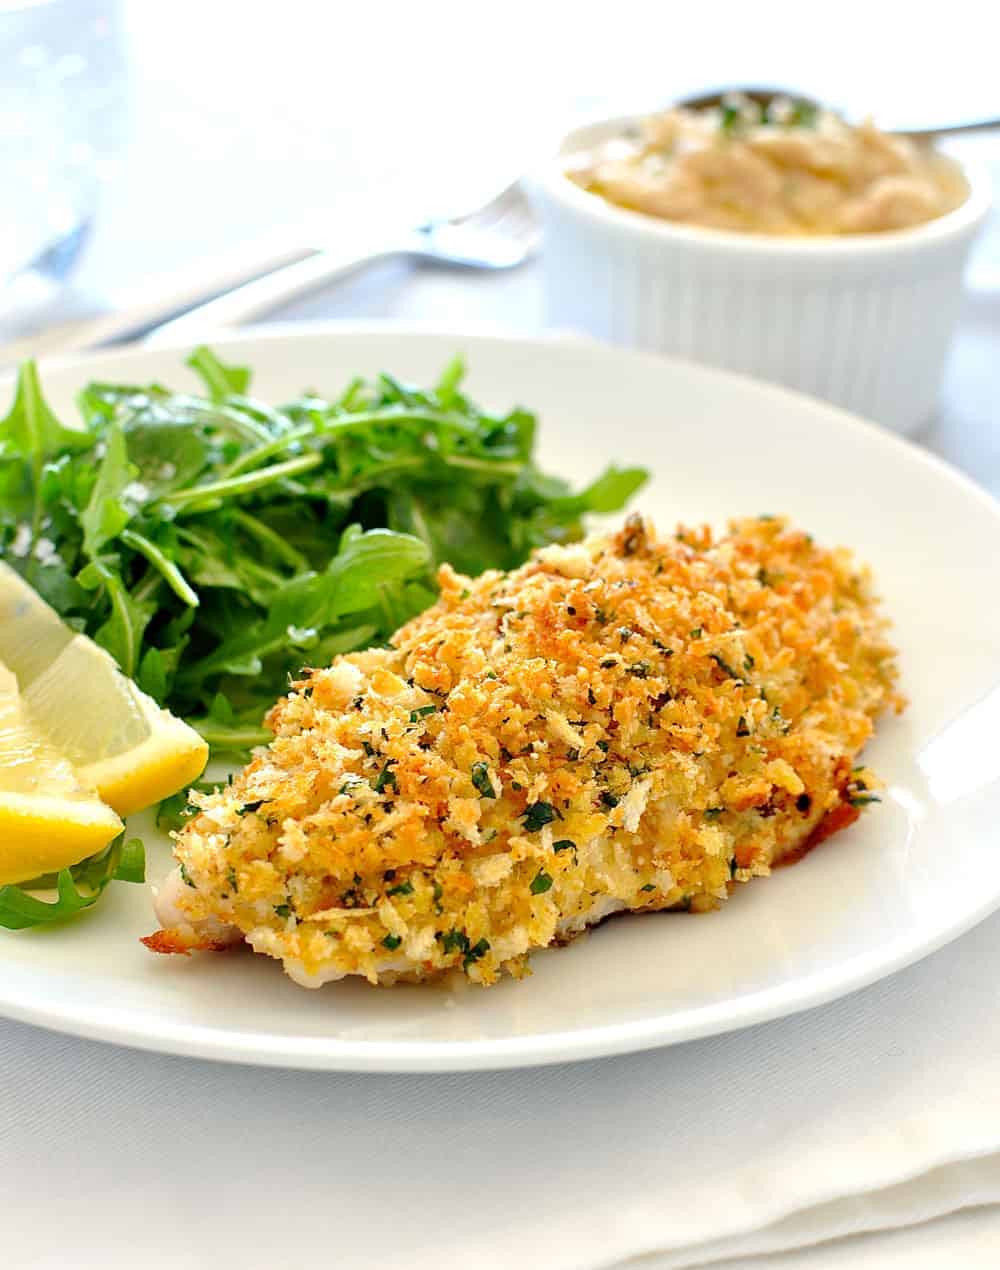 Insanely delicious golden parmesan garlic crumb and a perfectly cooked fish. {15 minutes, 260 calories} #baked #broiled #grilled #healthy #crumbed